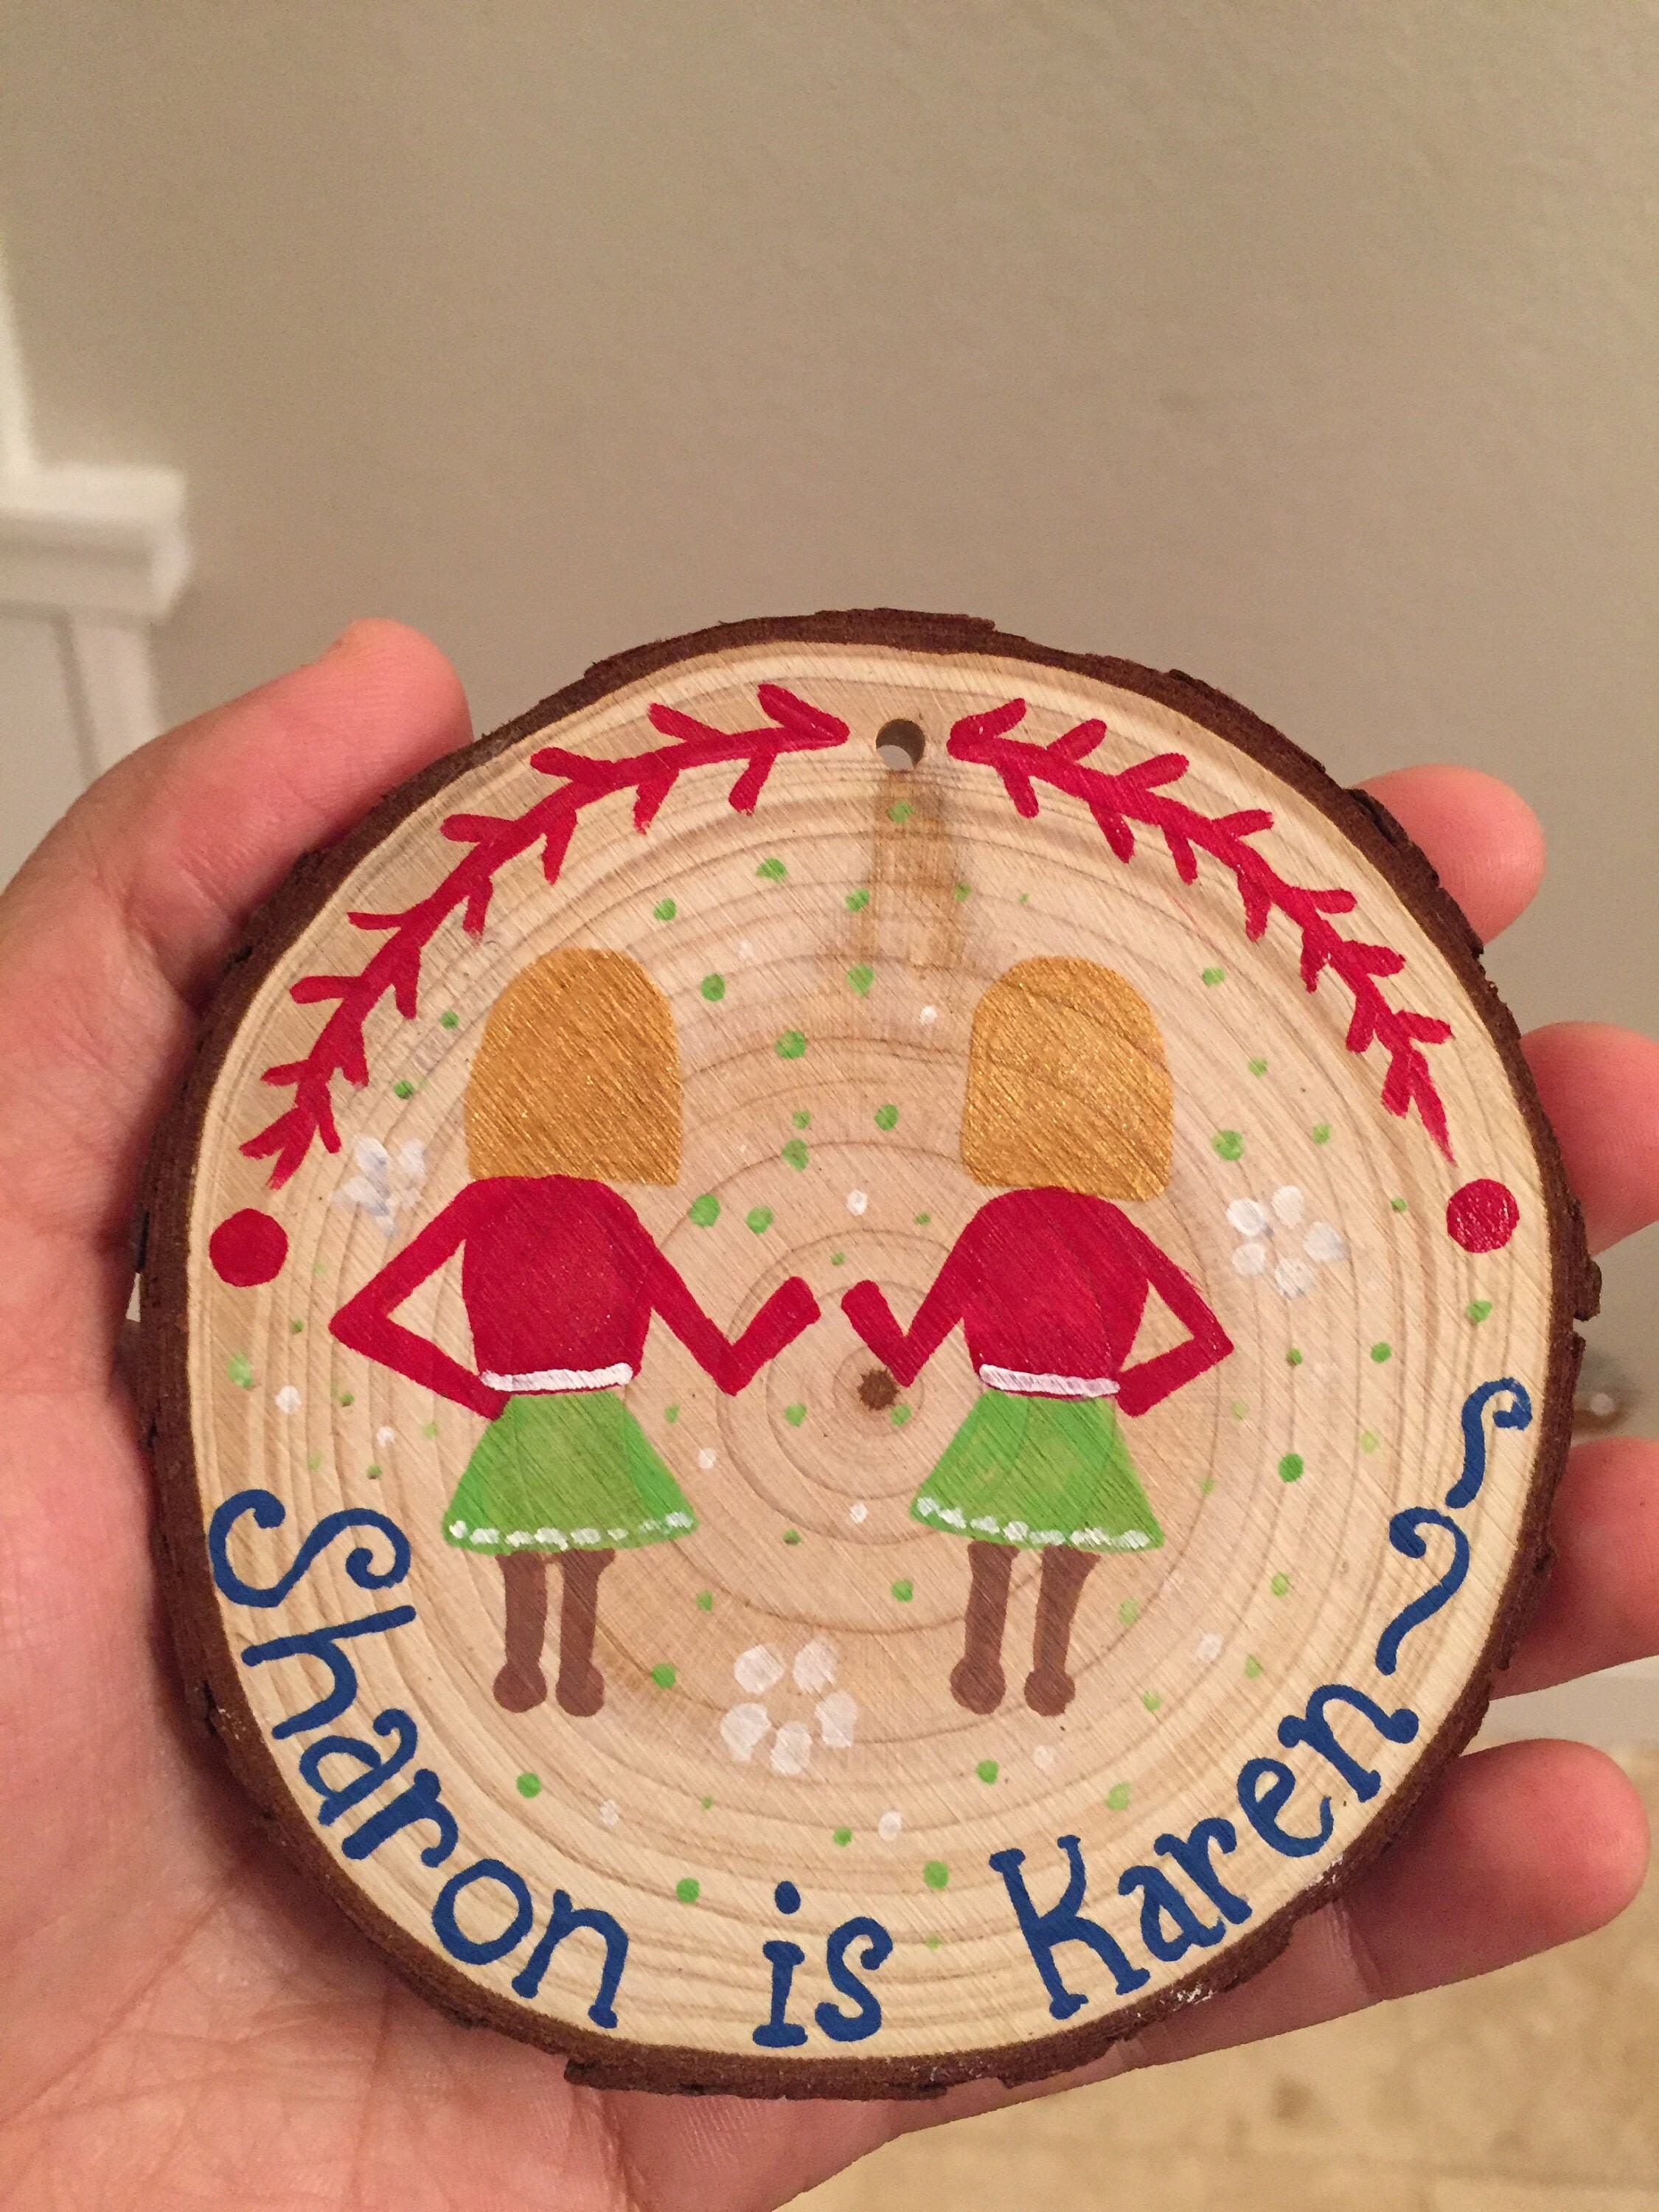 Karen Gifts Pun Gifts Sharing is Caring but Sharon is Karen Sharon Gifts Cliche Puns Funny Ornaments Sharon is Karen Gifts Handmade